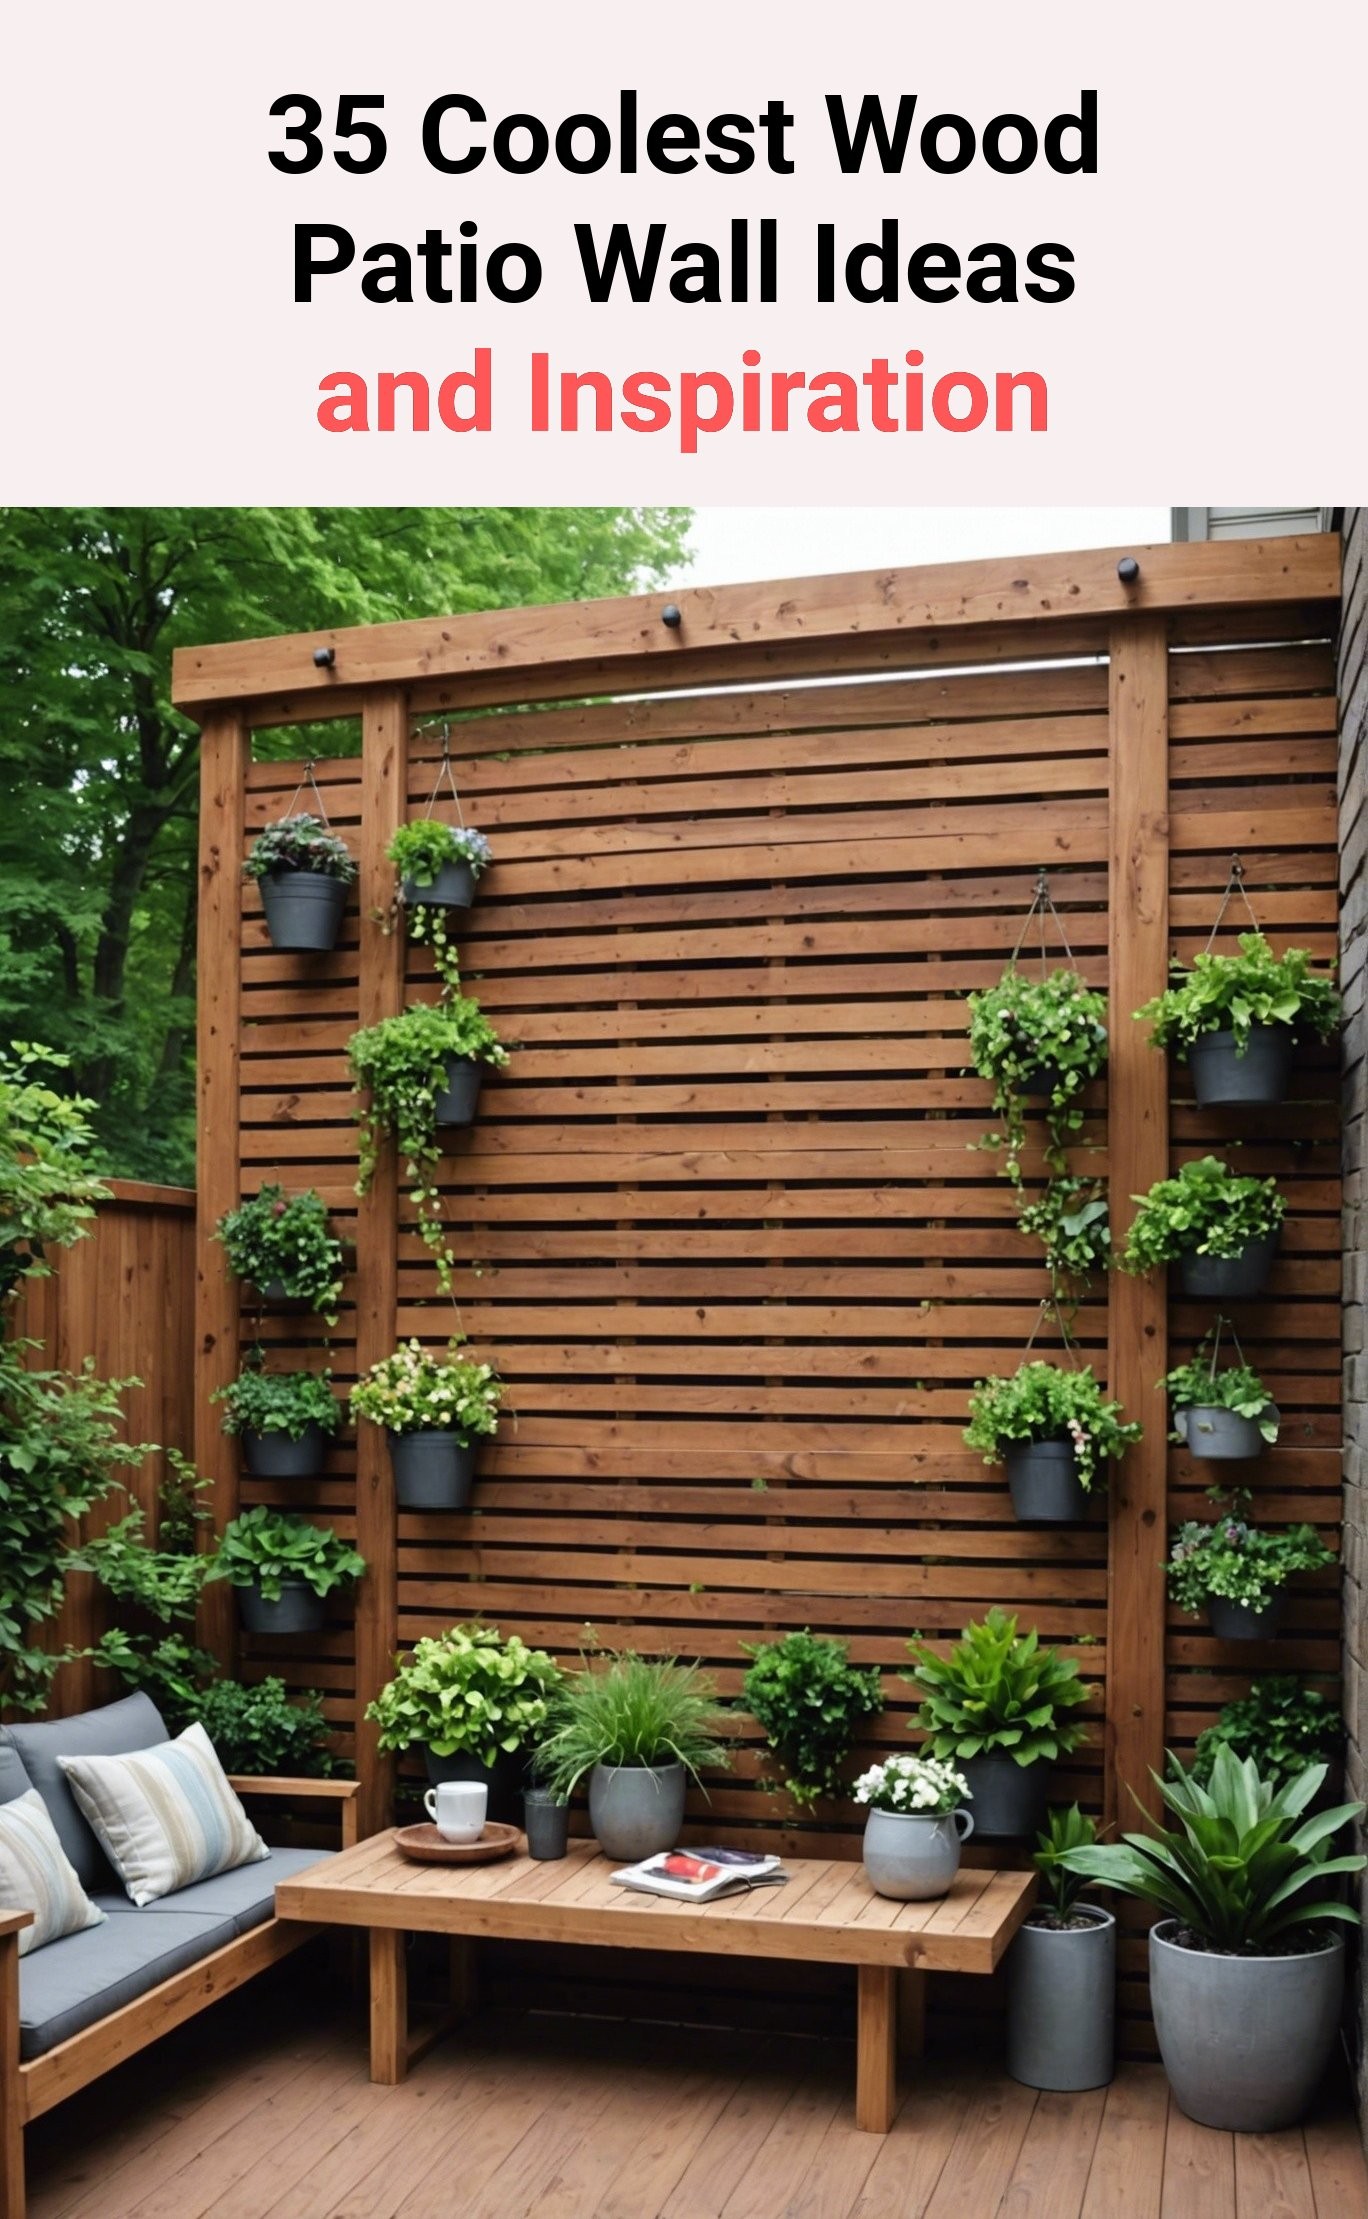 35 Coolest Wood Patio Wall Ideas and Inspiration